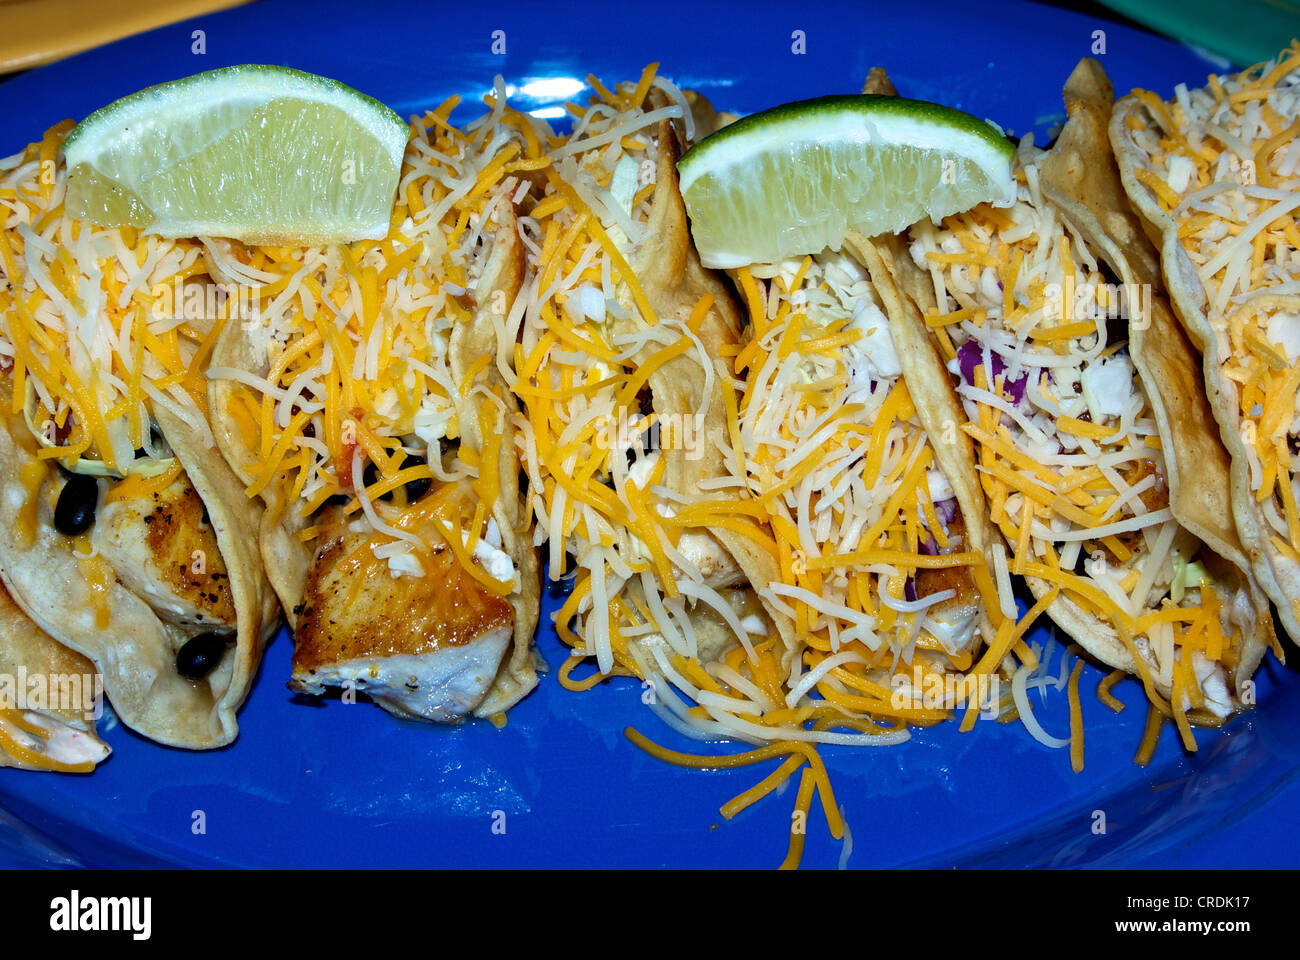 Platter fish tacos grated cheese olive topping lime wedges Stock Photo